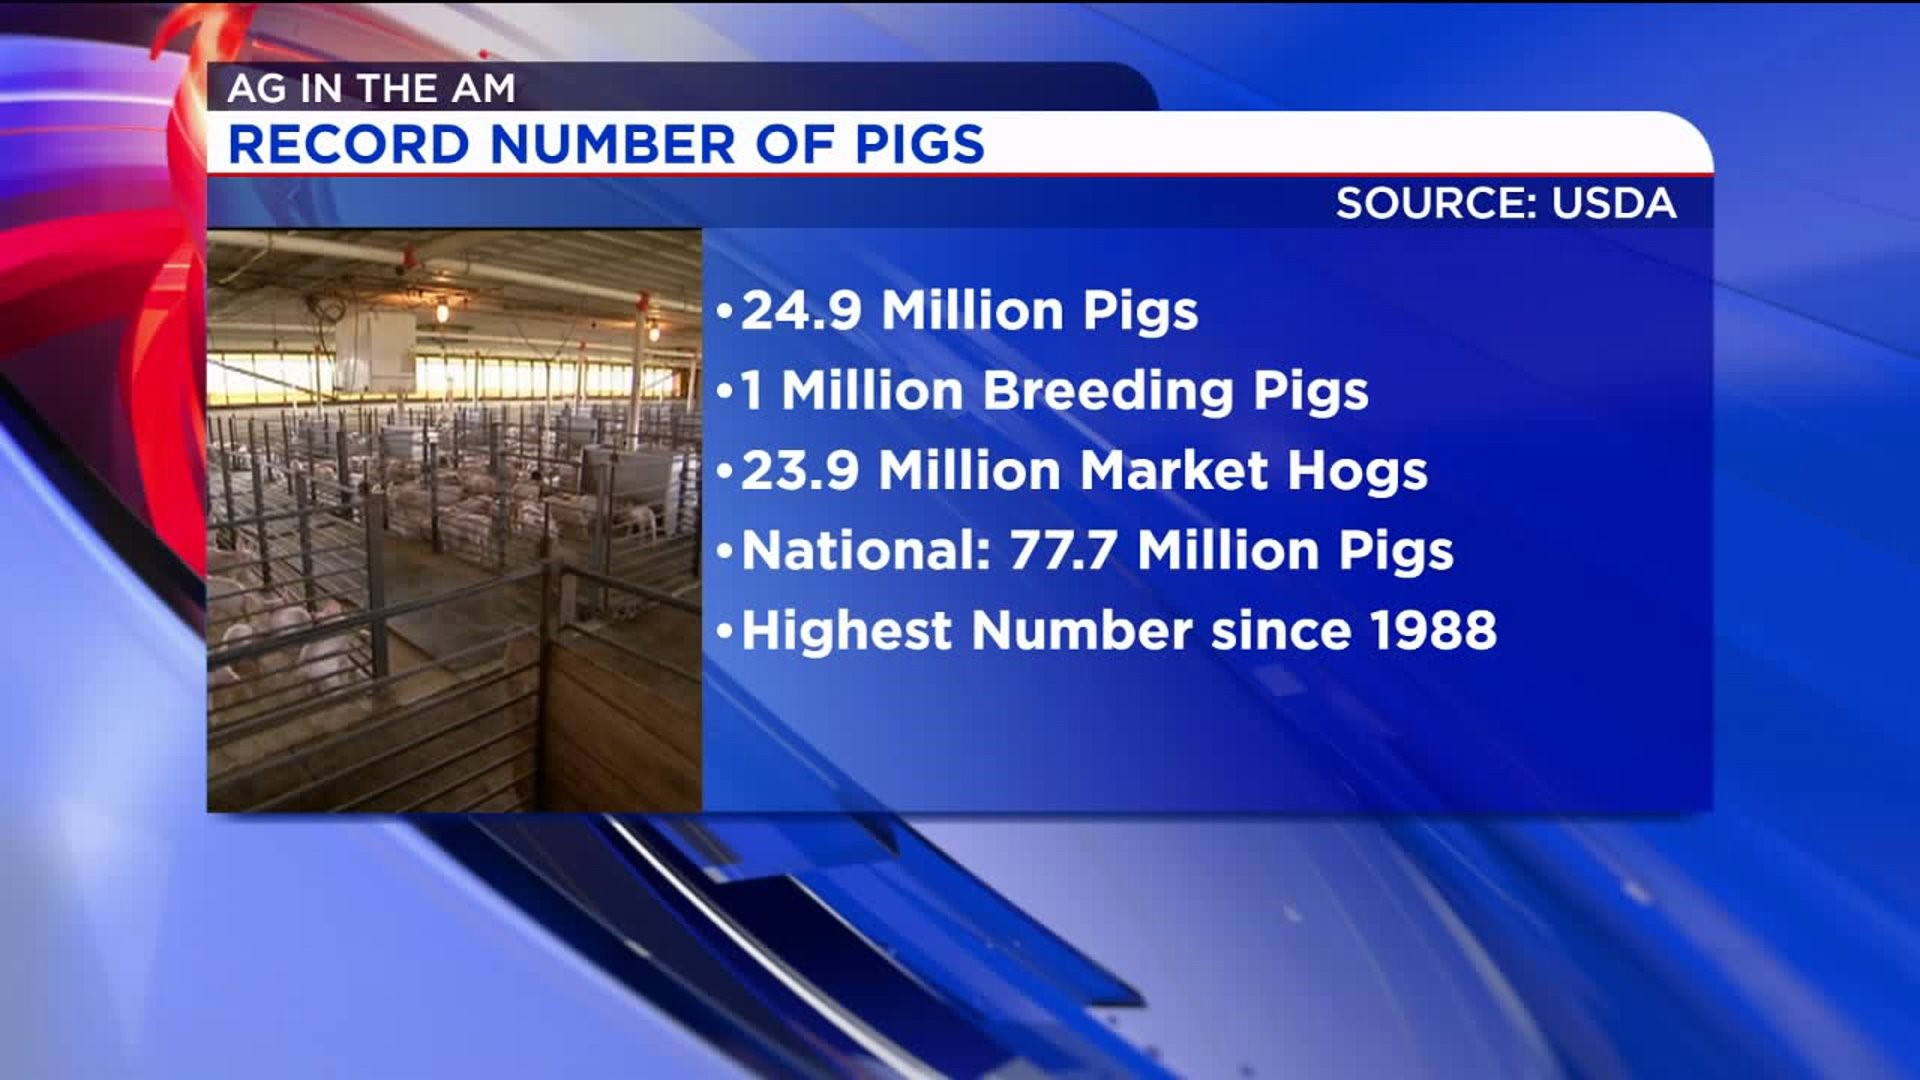 Iowa home to 24.9 million pigs, a new record and up 6%